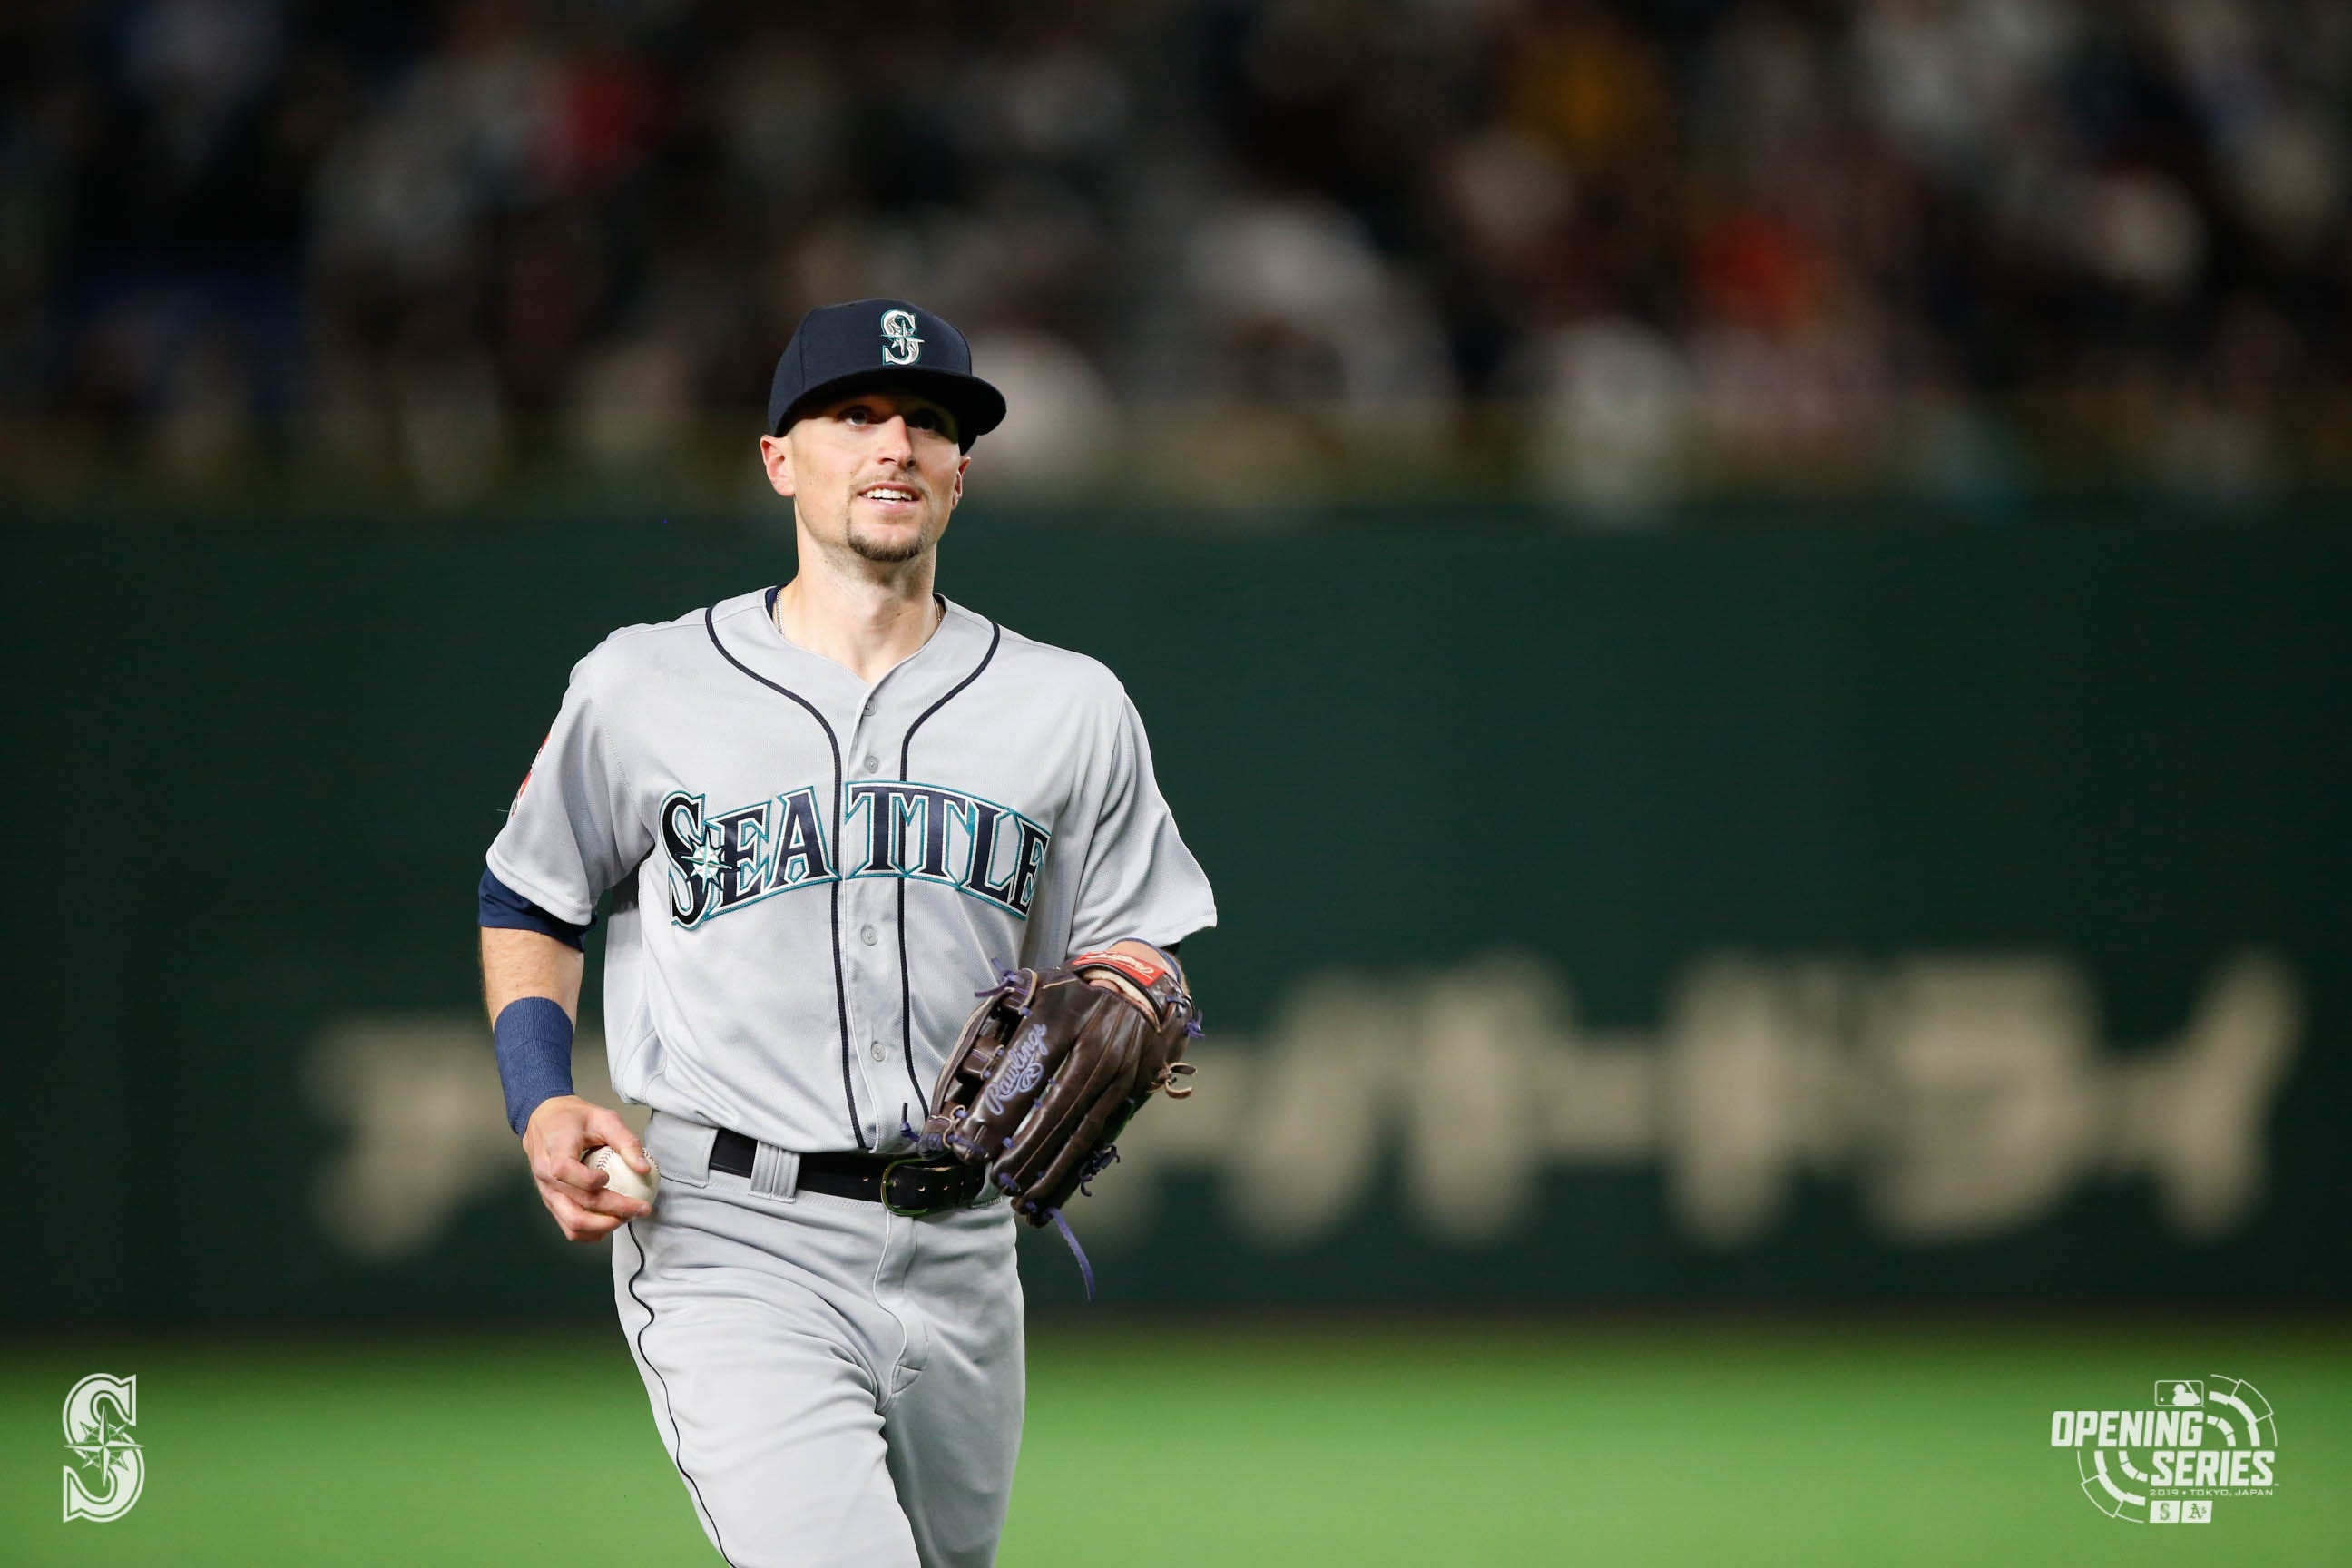 Seattle Mariners 2019 schedule: Japan, the Cubs, and nonsensical road trips  - Lookout Landing